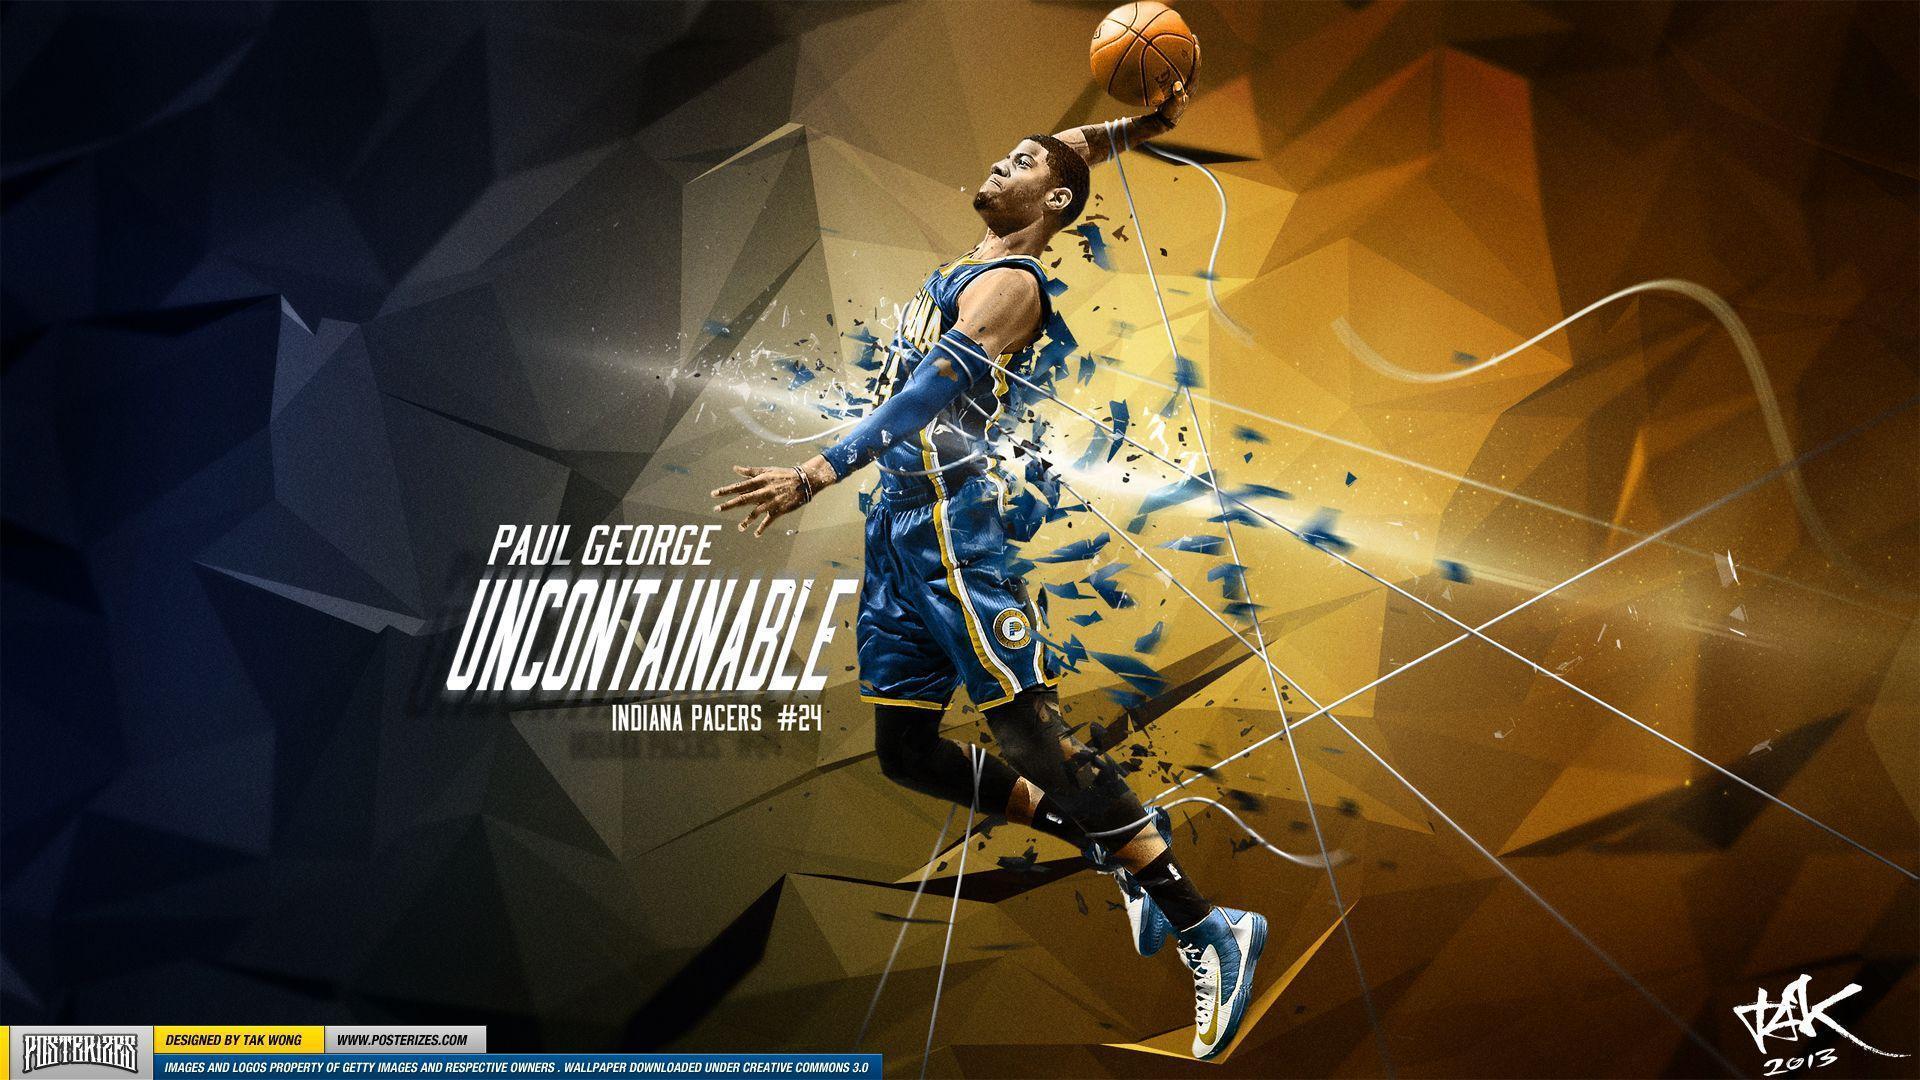 Paul George 'Uncontainable' Wallpaper. Posterizes.com